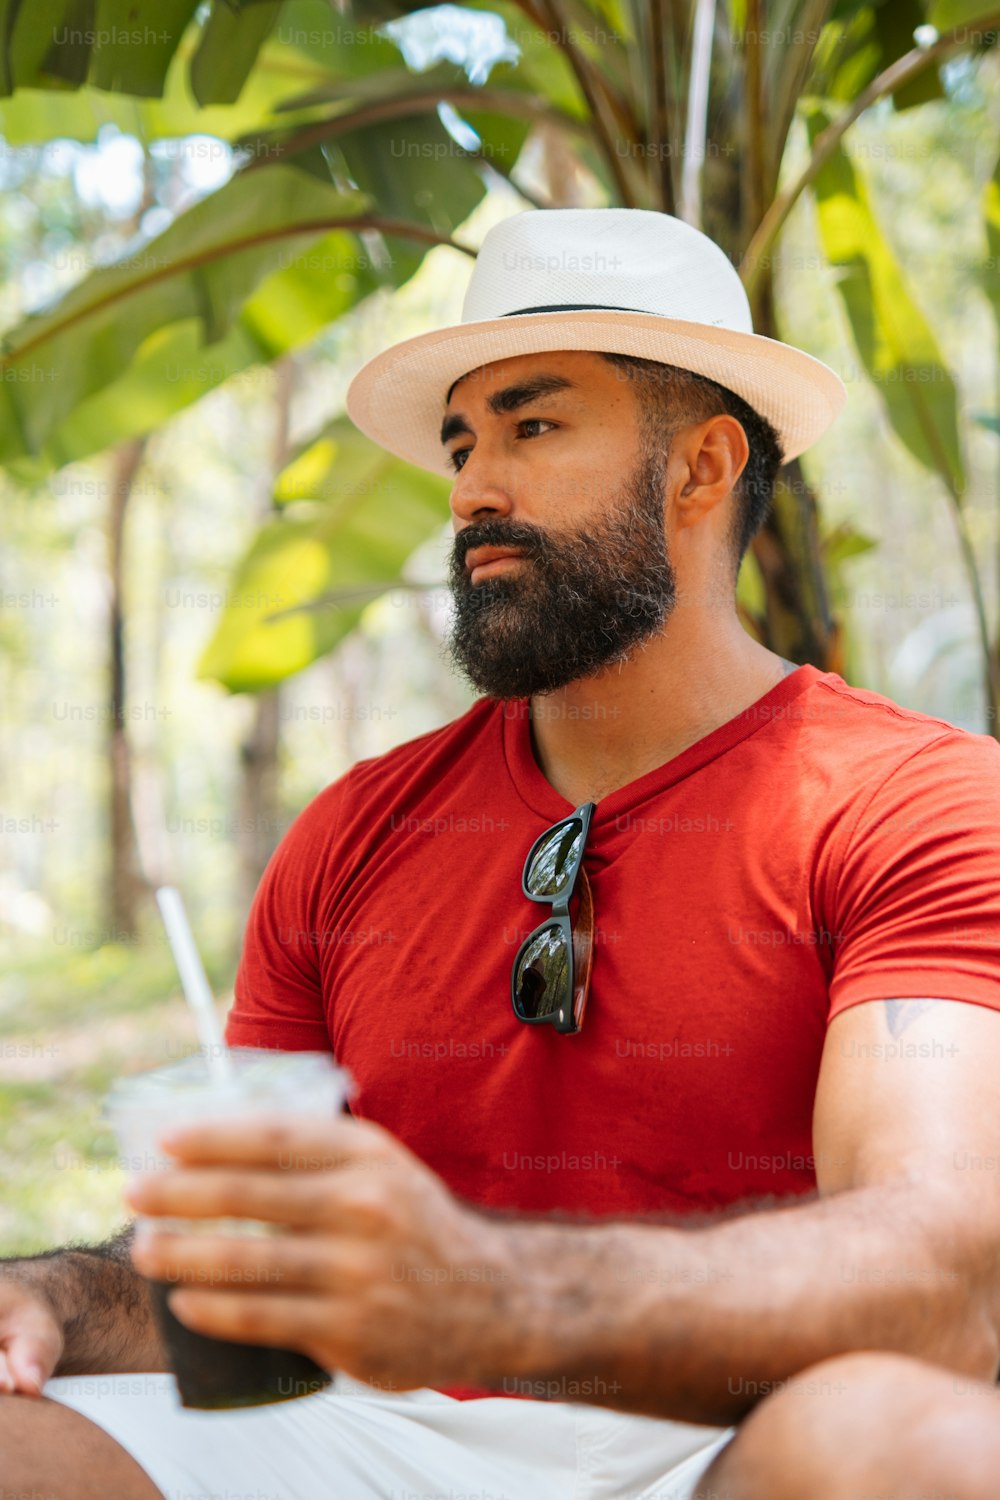 a man with a beard wearing a red shirt and a white hat